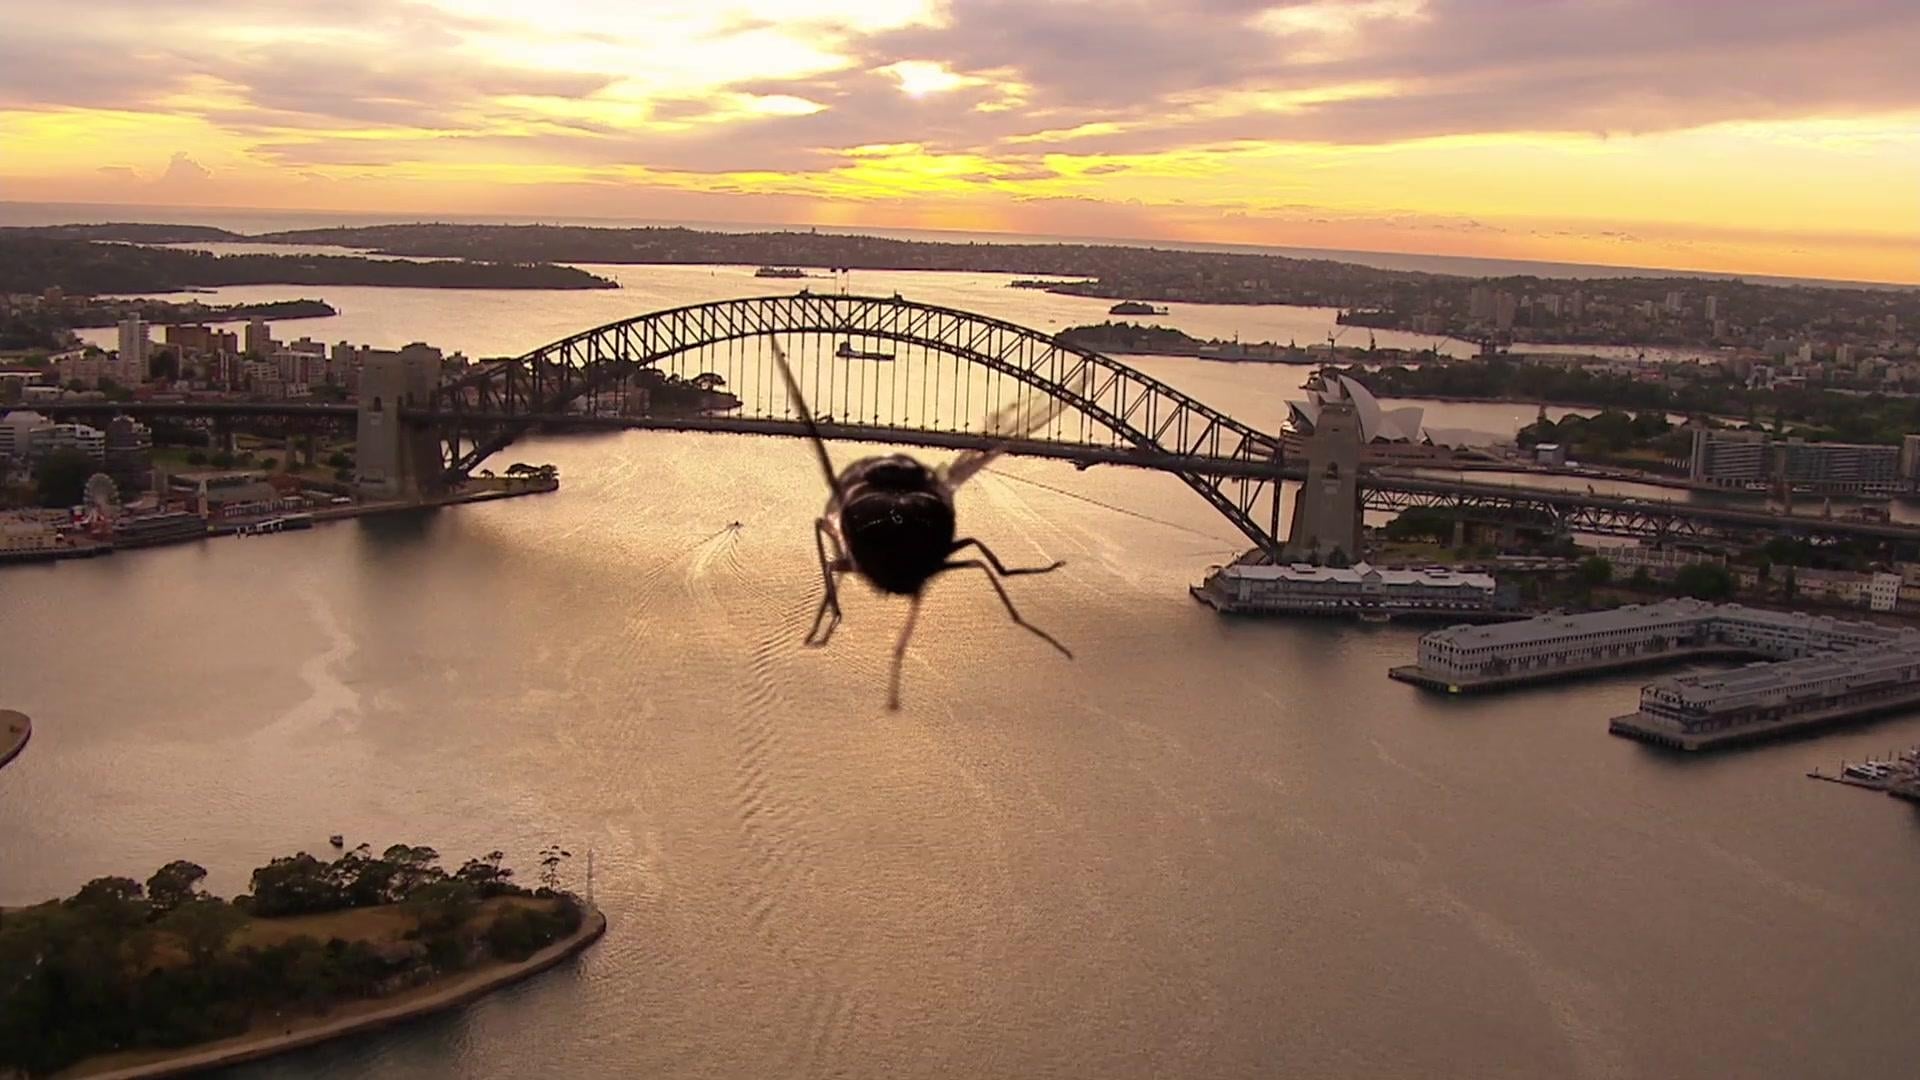 The Great Australian Fly 2014 123movies